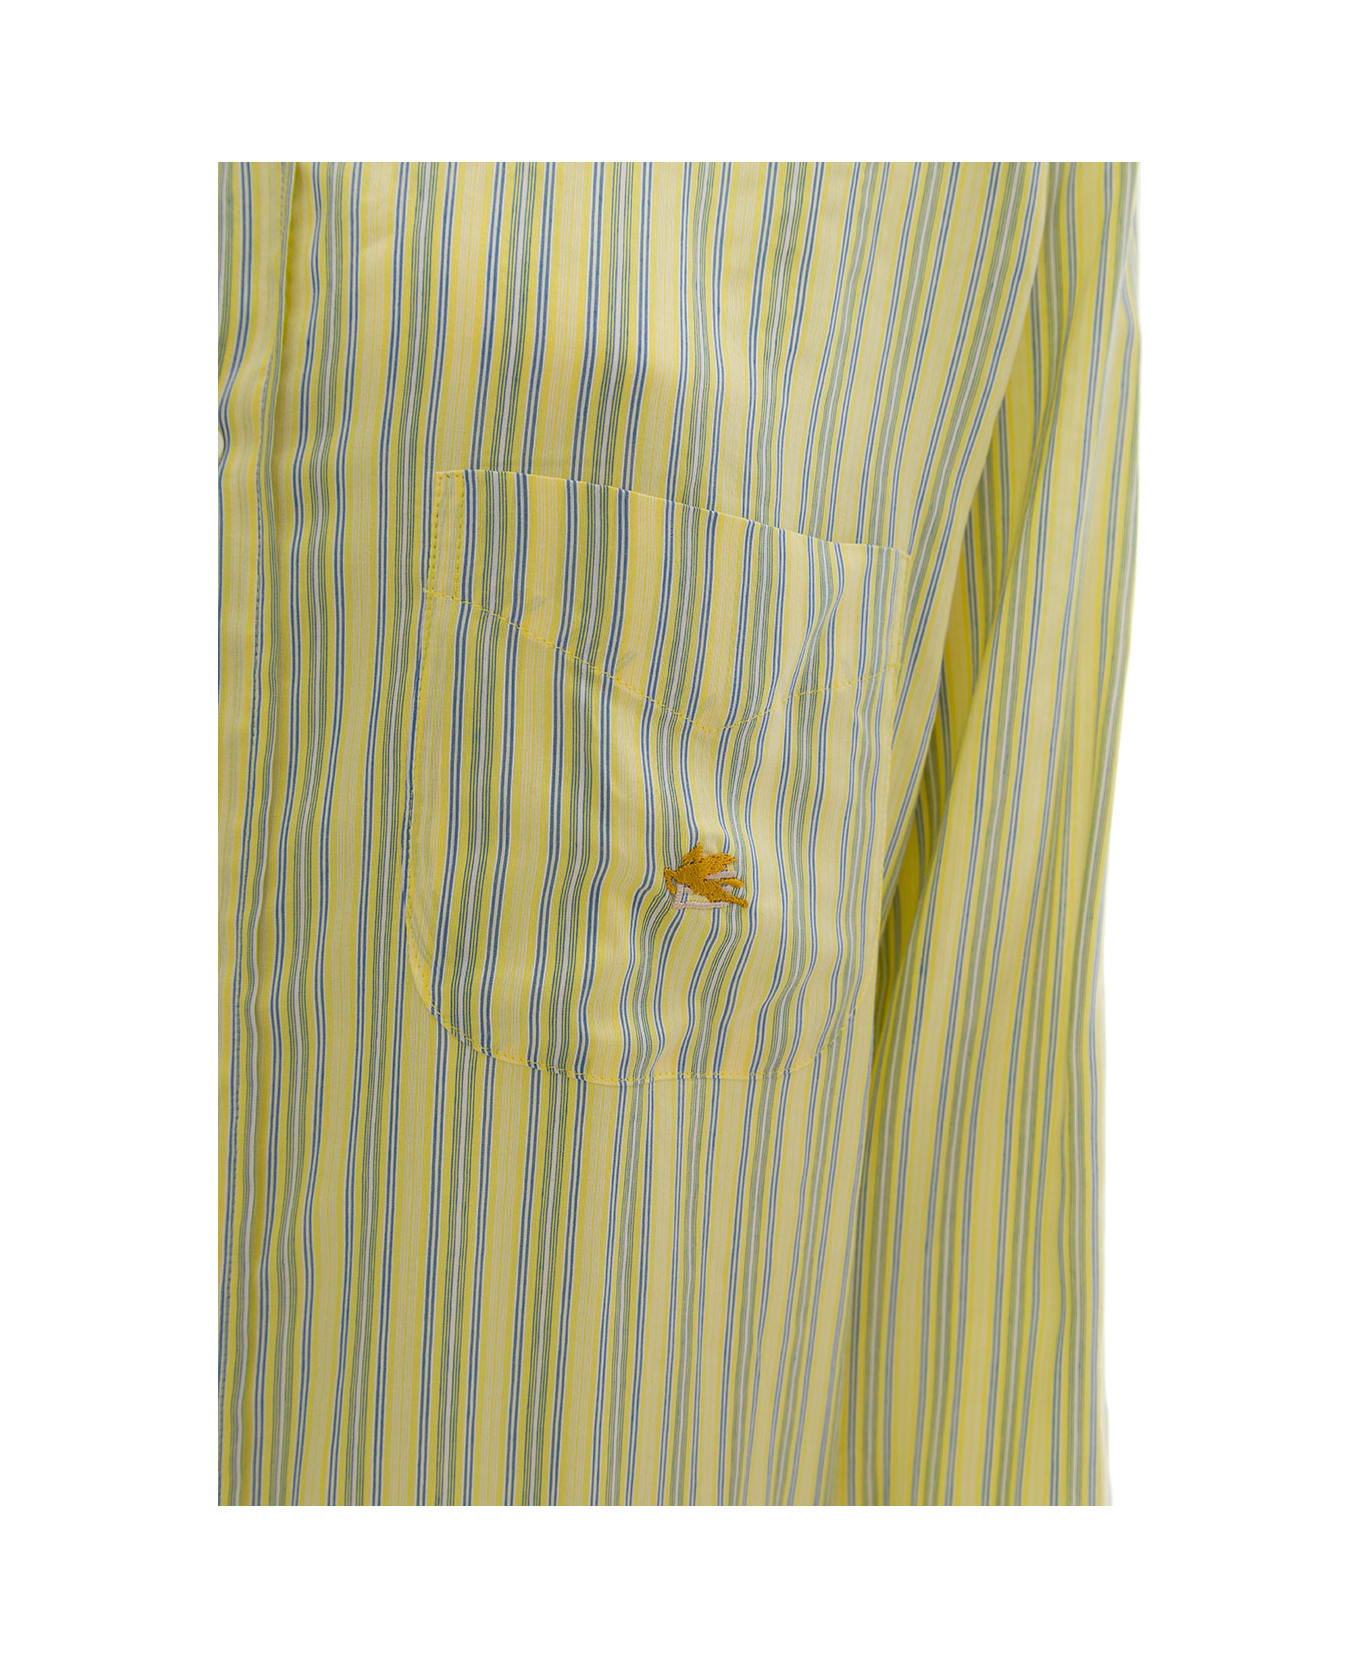 Etro Long Striped Yellow Shirt With Embroidery On The Pocket In Silk Woman - Yellow